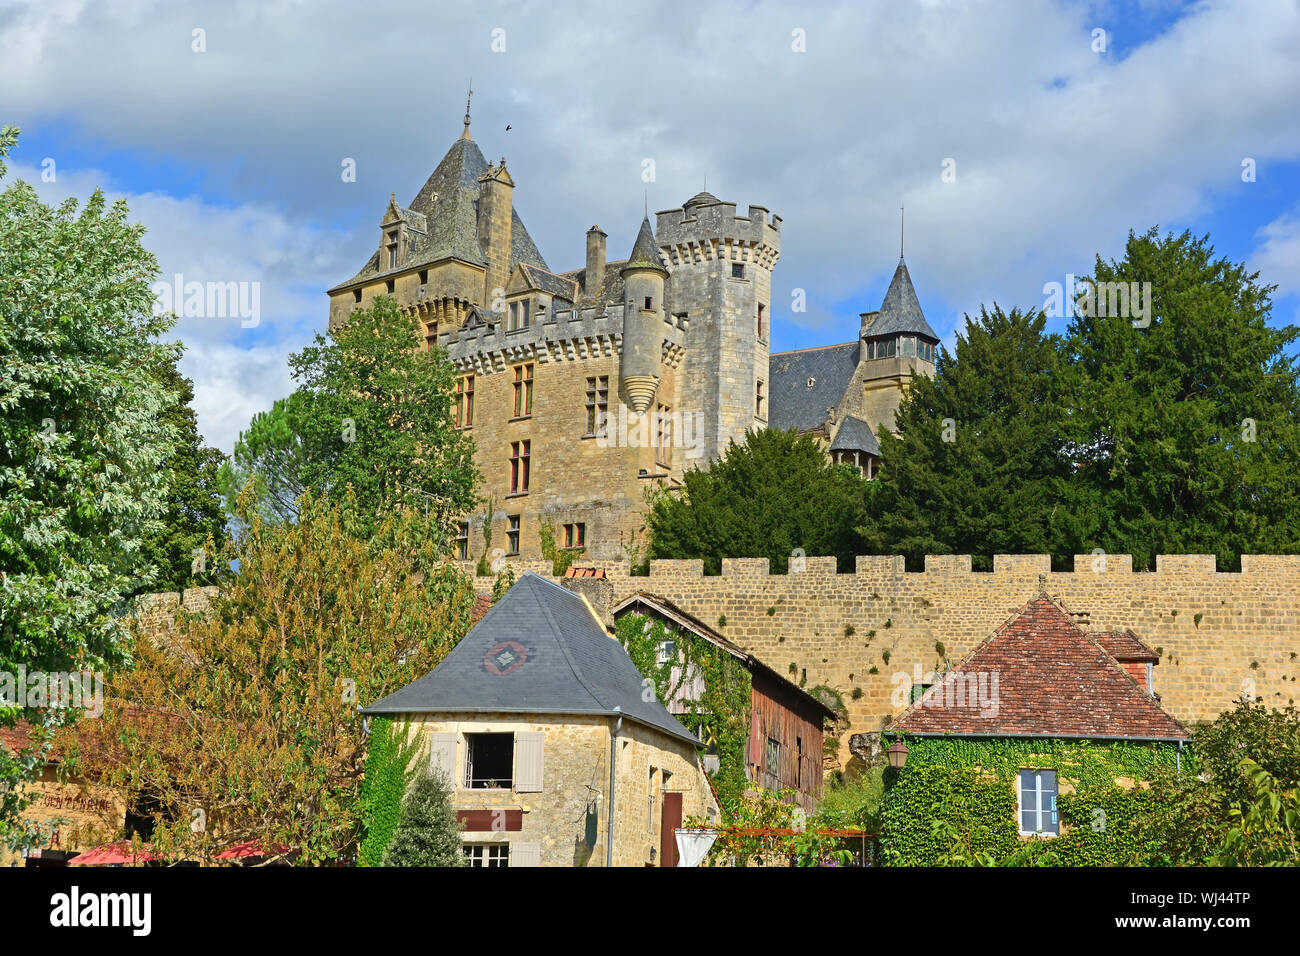 The fortified Chateau Montfort on the Dordogne River in France Stock Photo